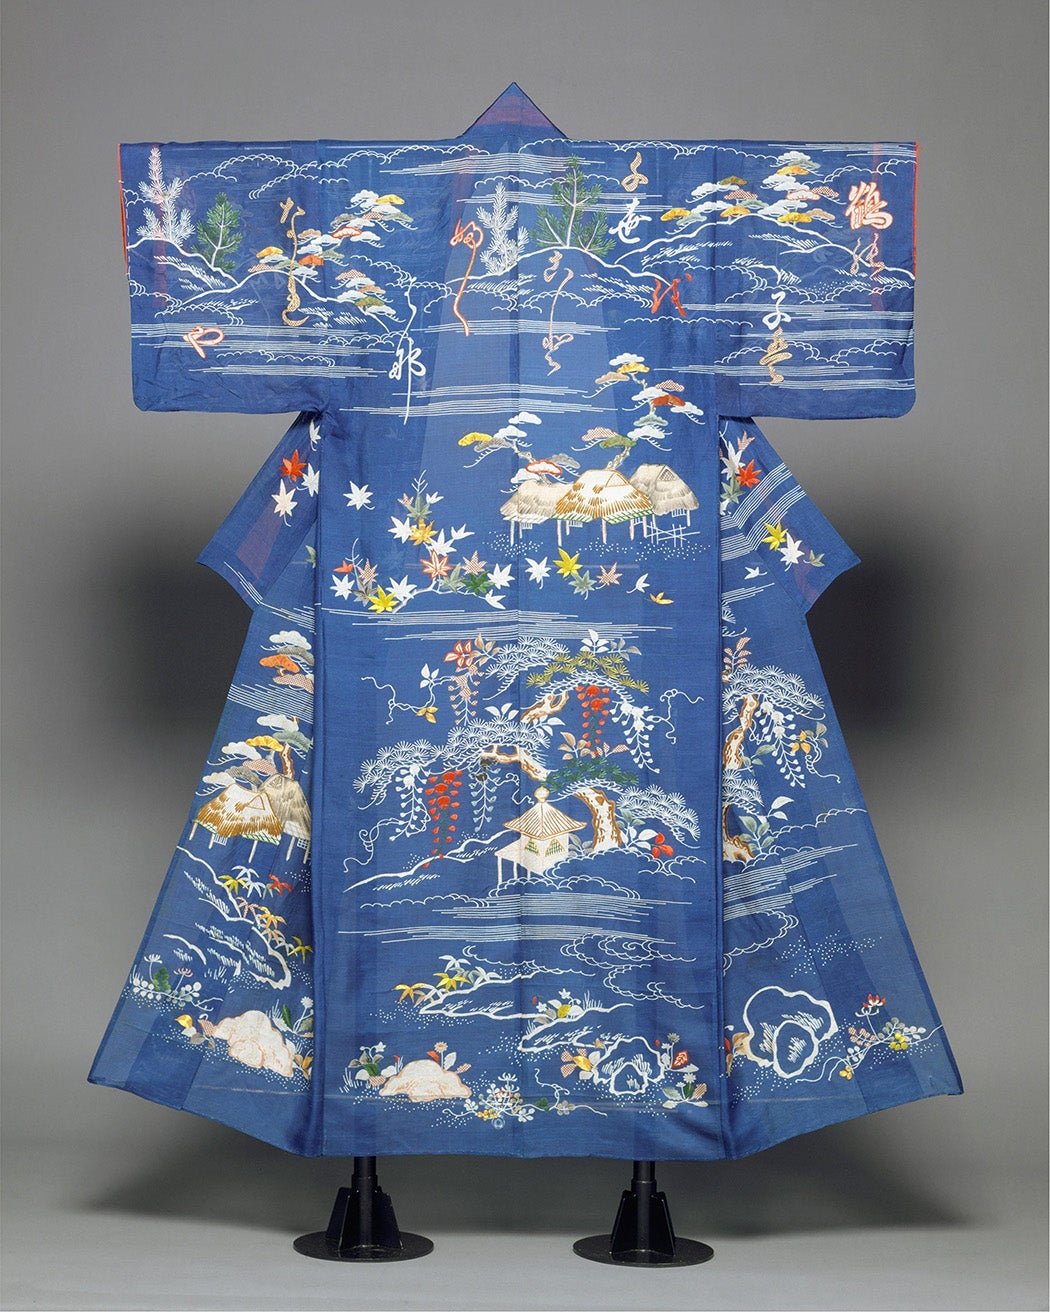 the first kimono made back in the days